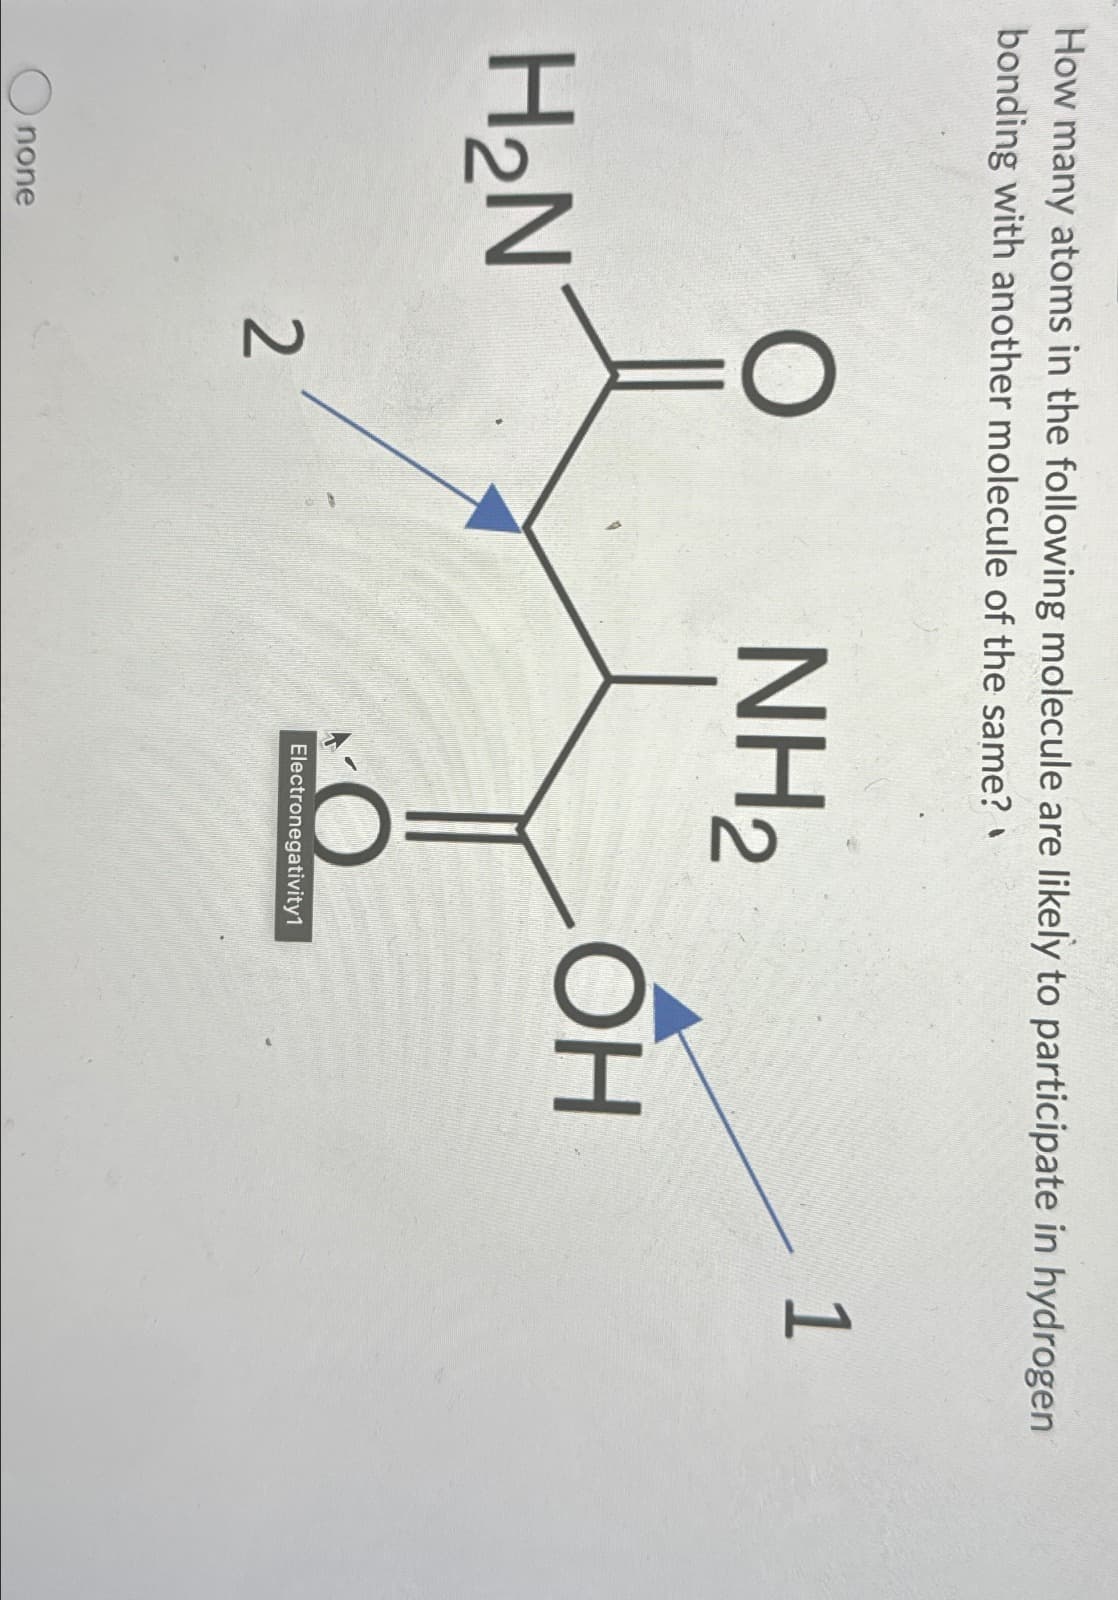 How many atoms in the following molecule are likely to participate in hydrogen
bonding with another molecule of the same?
H₂N
none
O
NH2
OH
1
p=
2
Electronegativity1